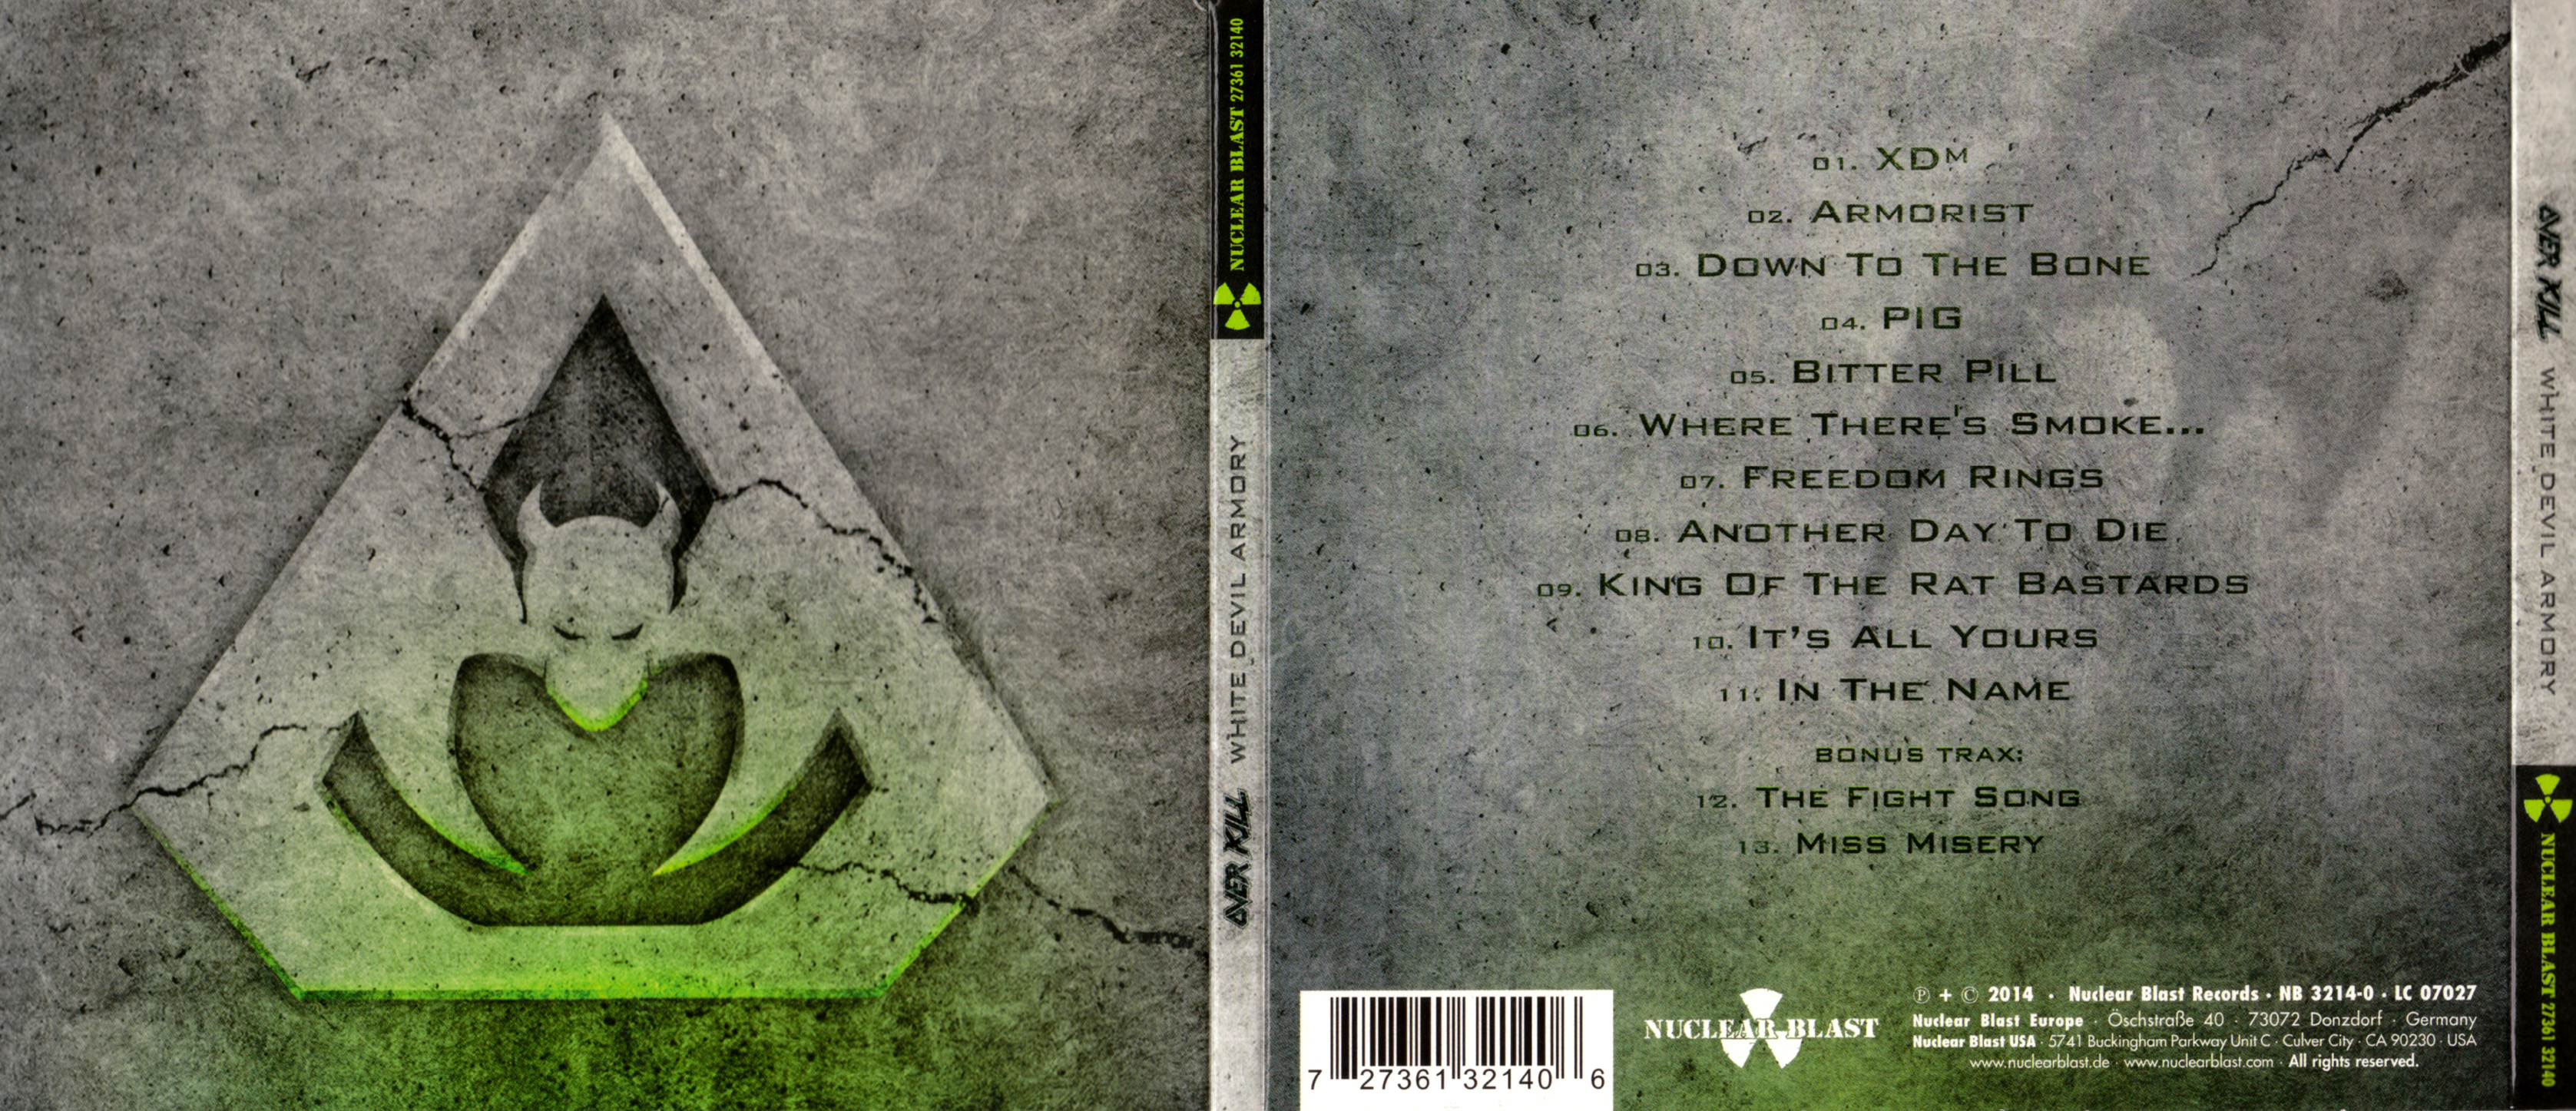 Overkill - White Devil Armory Limited Edition Digipak 2014 - Overkill - White Devil Armory_digi booklet2.jpg